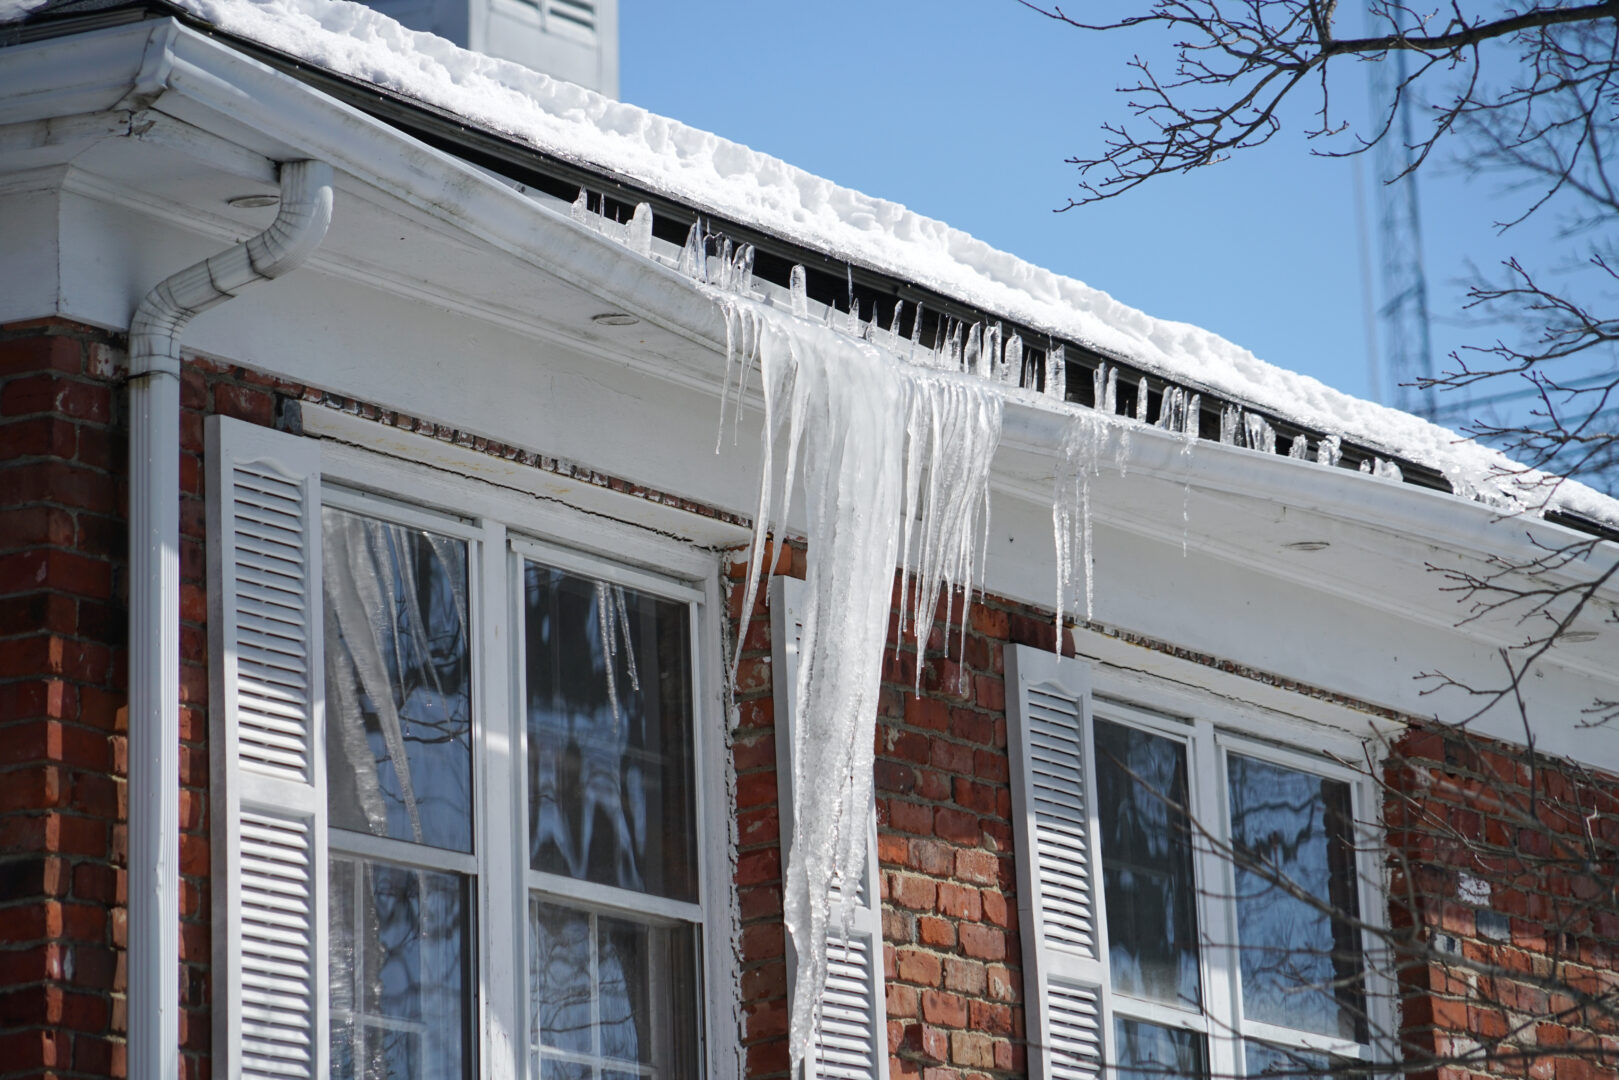 An older brick house with an ice dam forming in the roof gutter